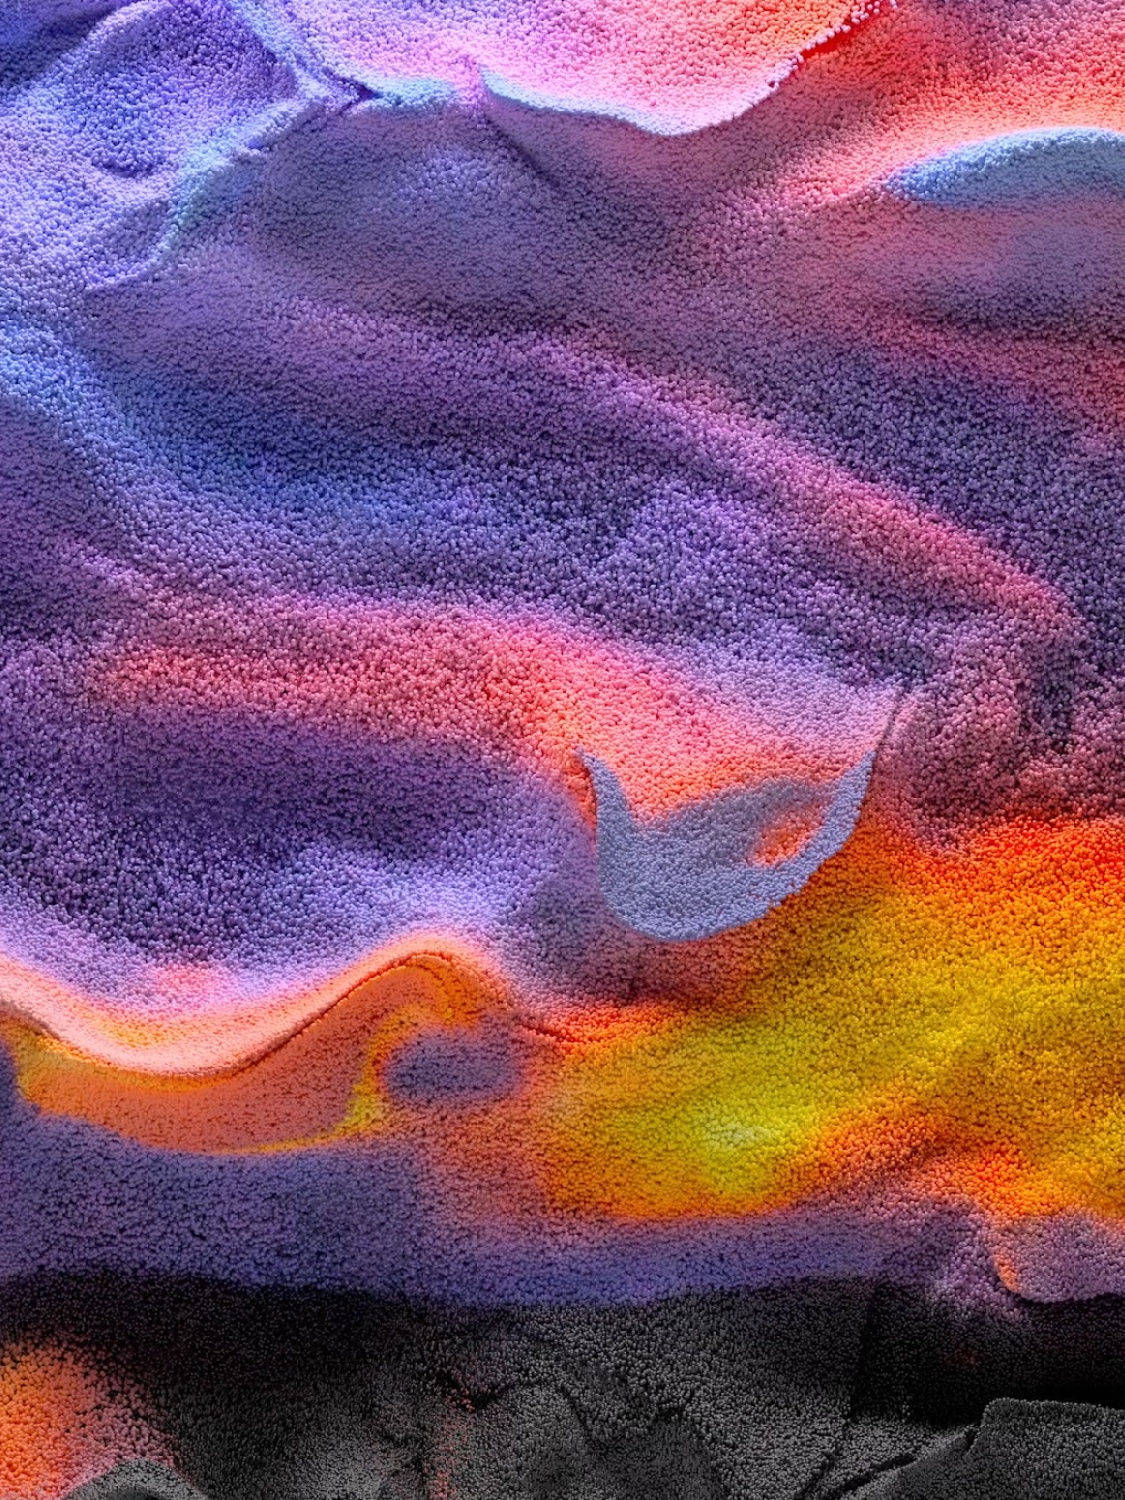 An abstract image that resembles a sandy landscape in the pink, purple, and orange hues of a desert sunset